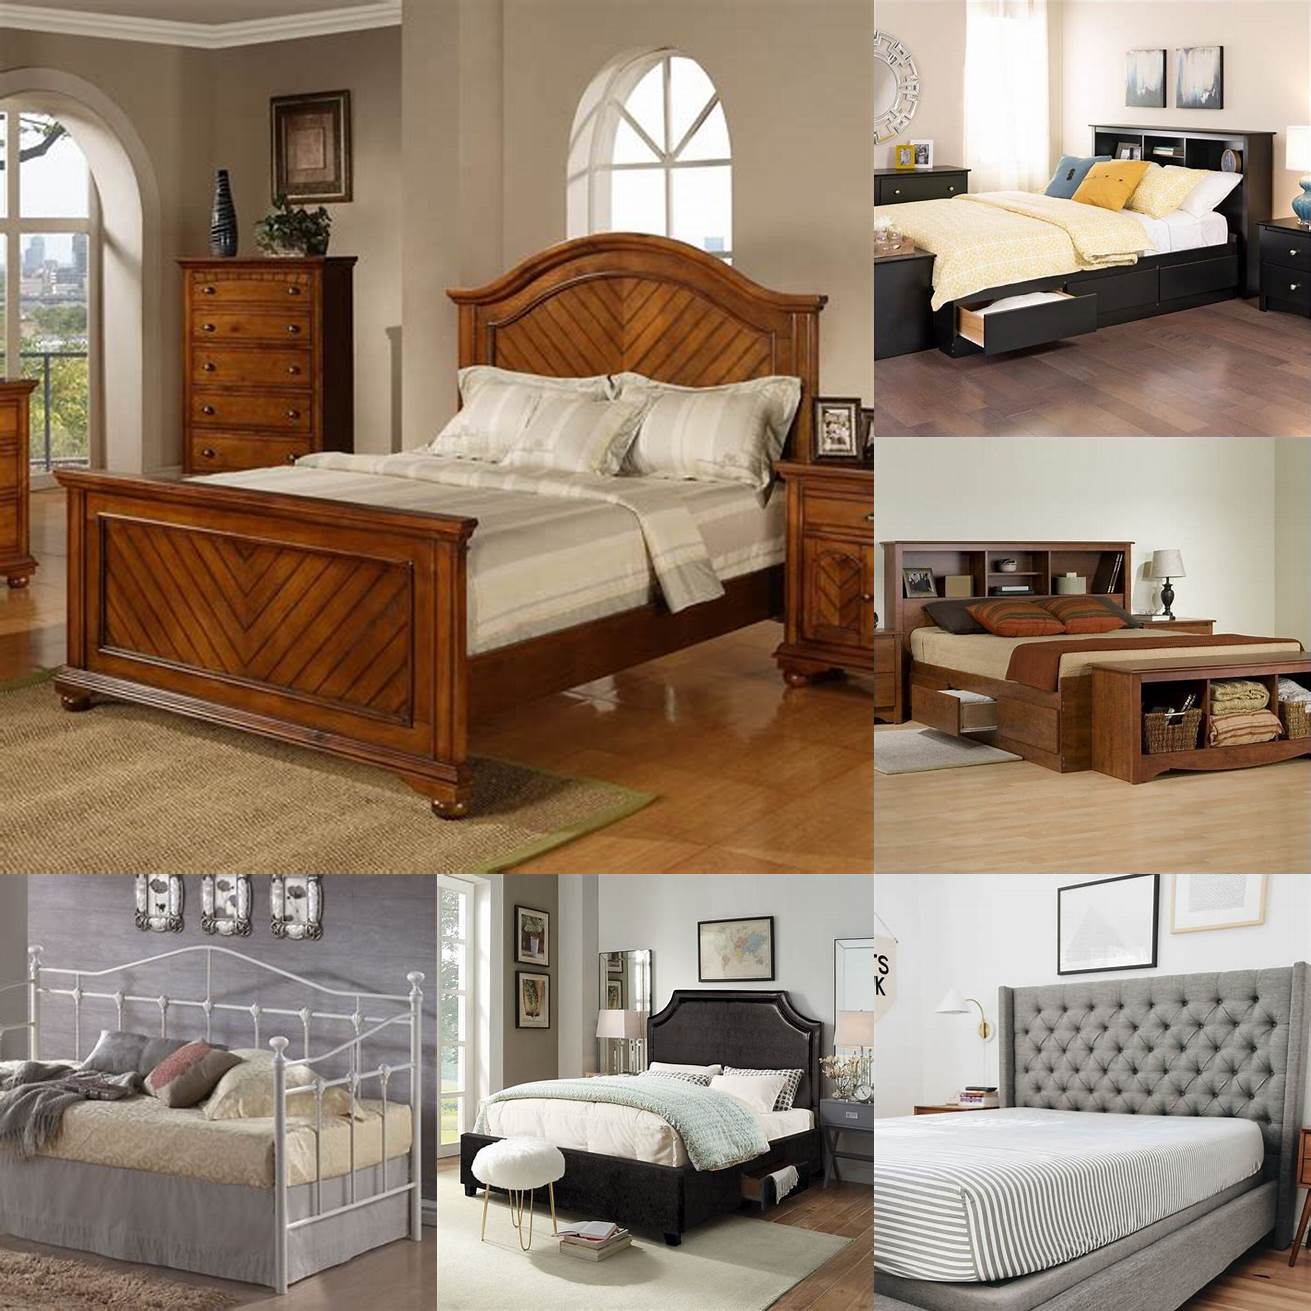 Image of different bed frames